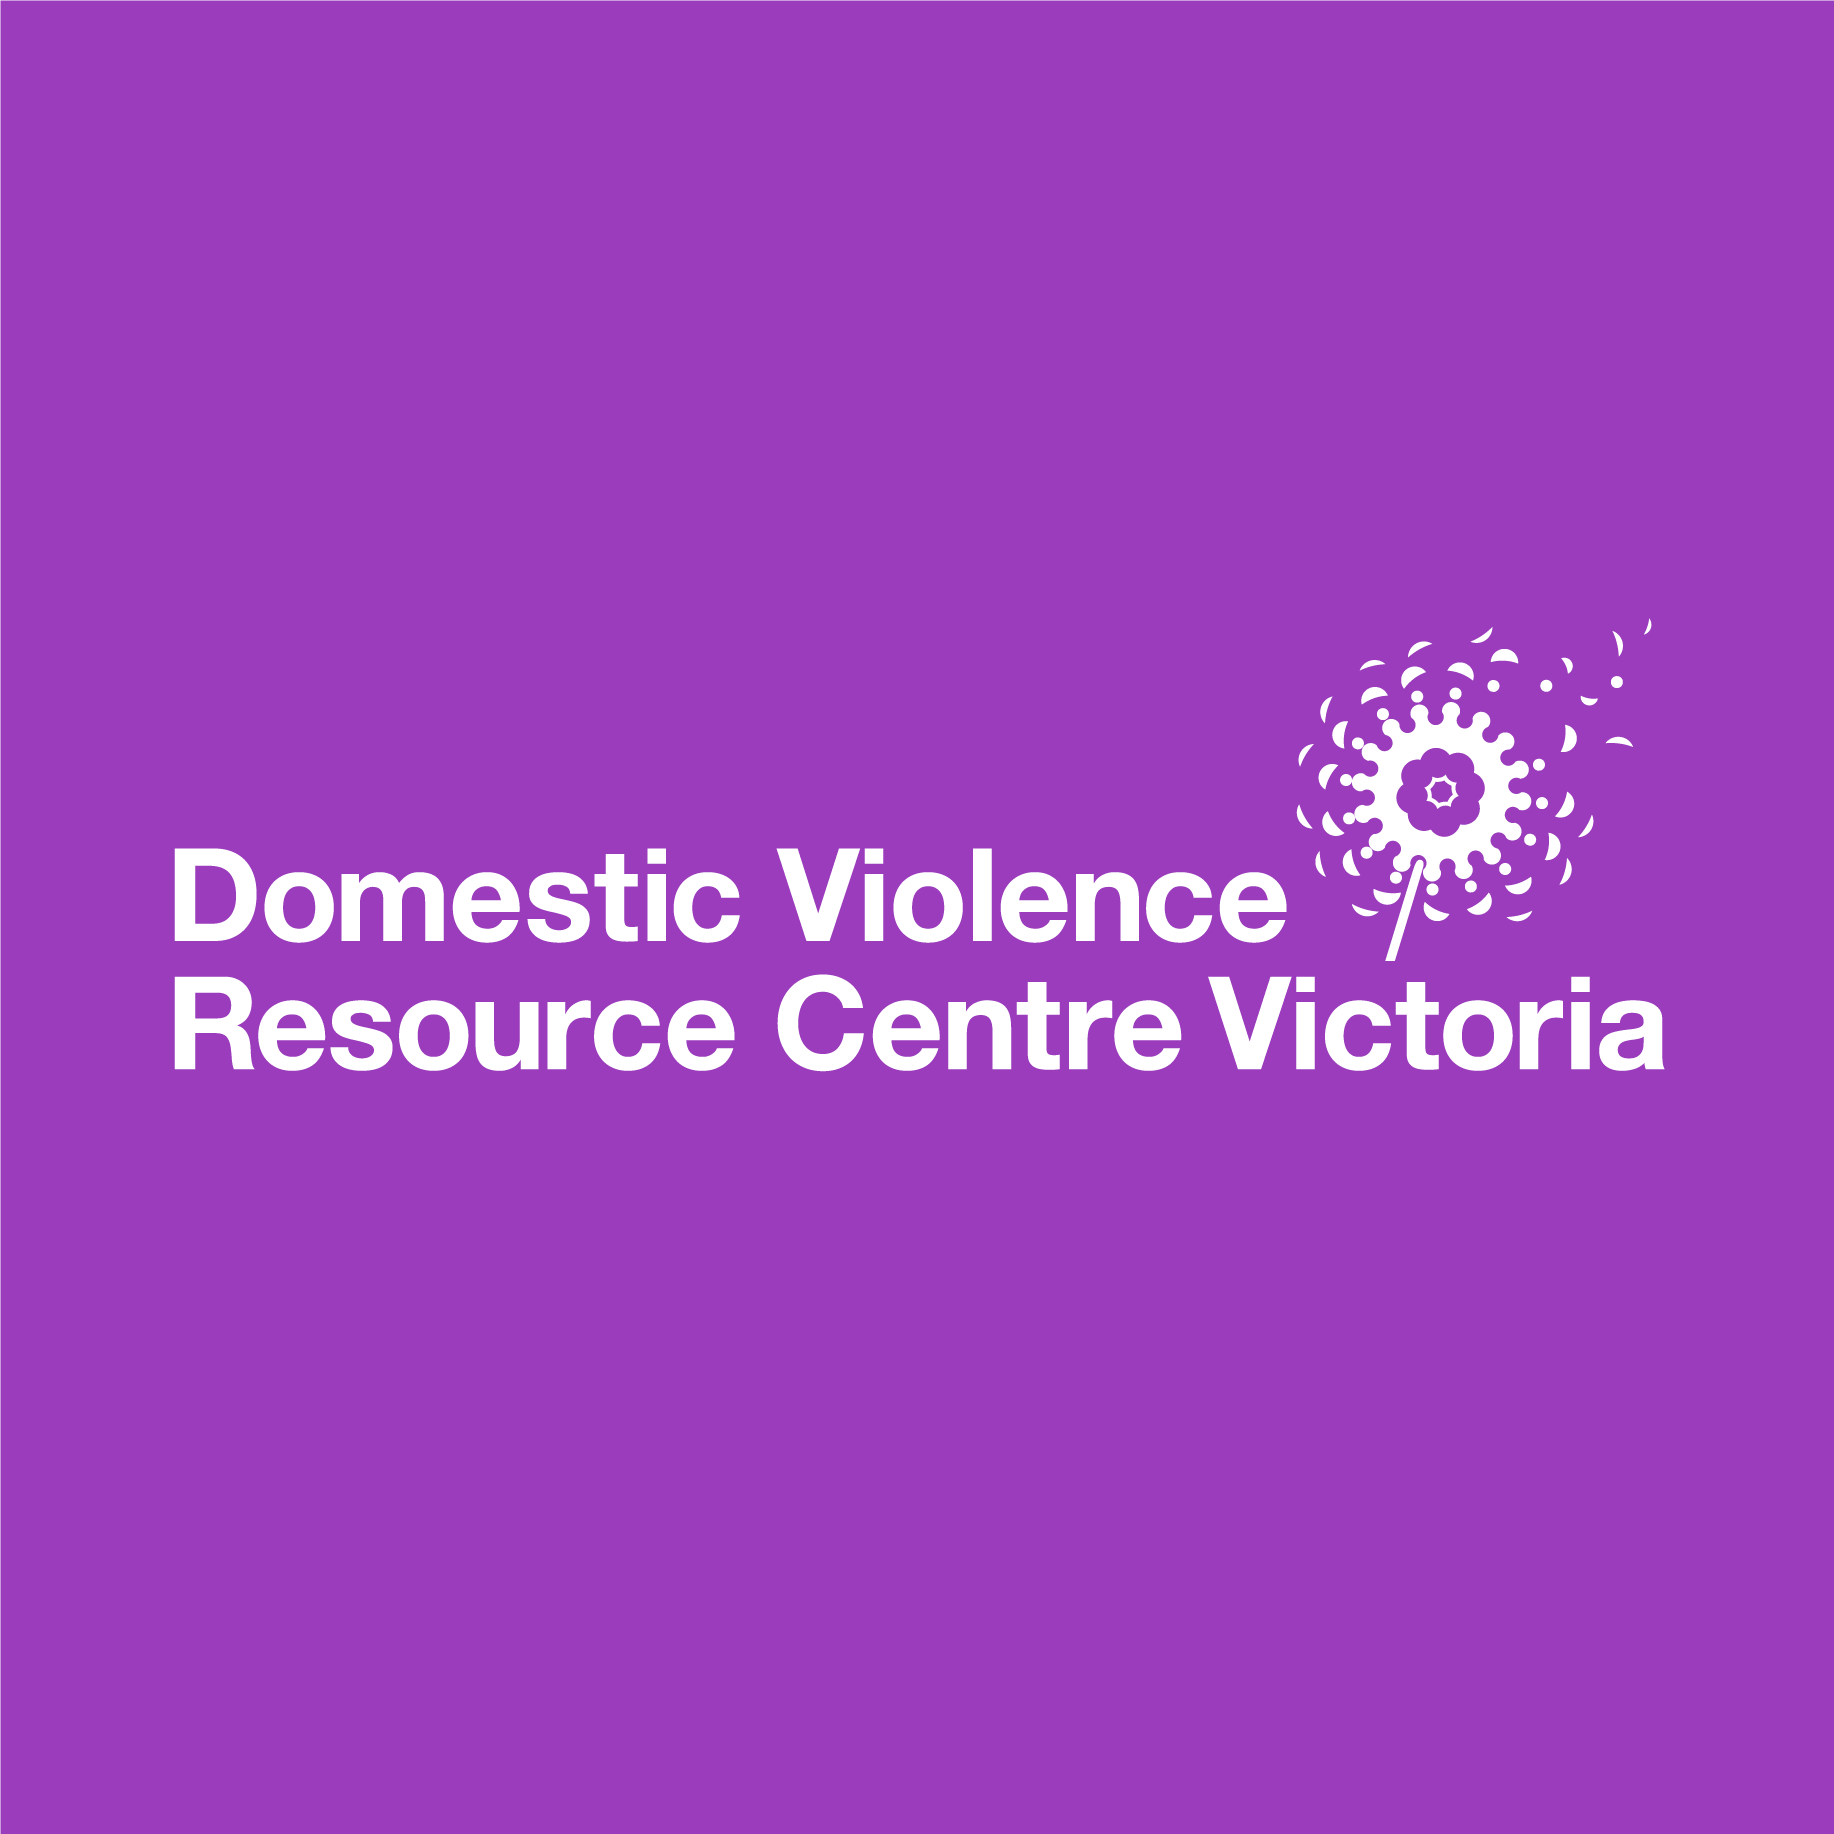 A new statutory authority for preventing family violence in Victoria